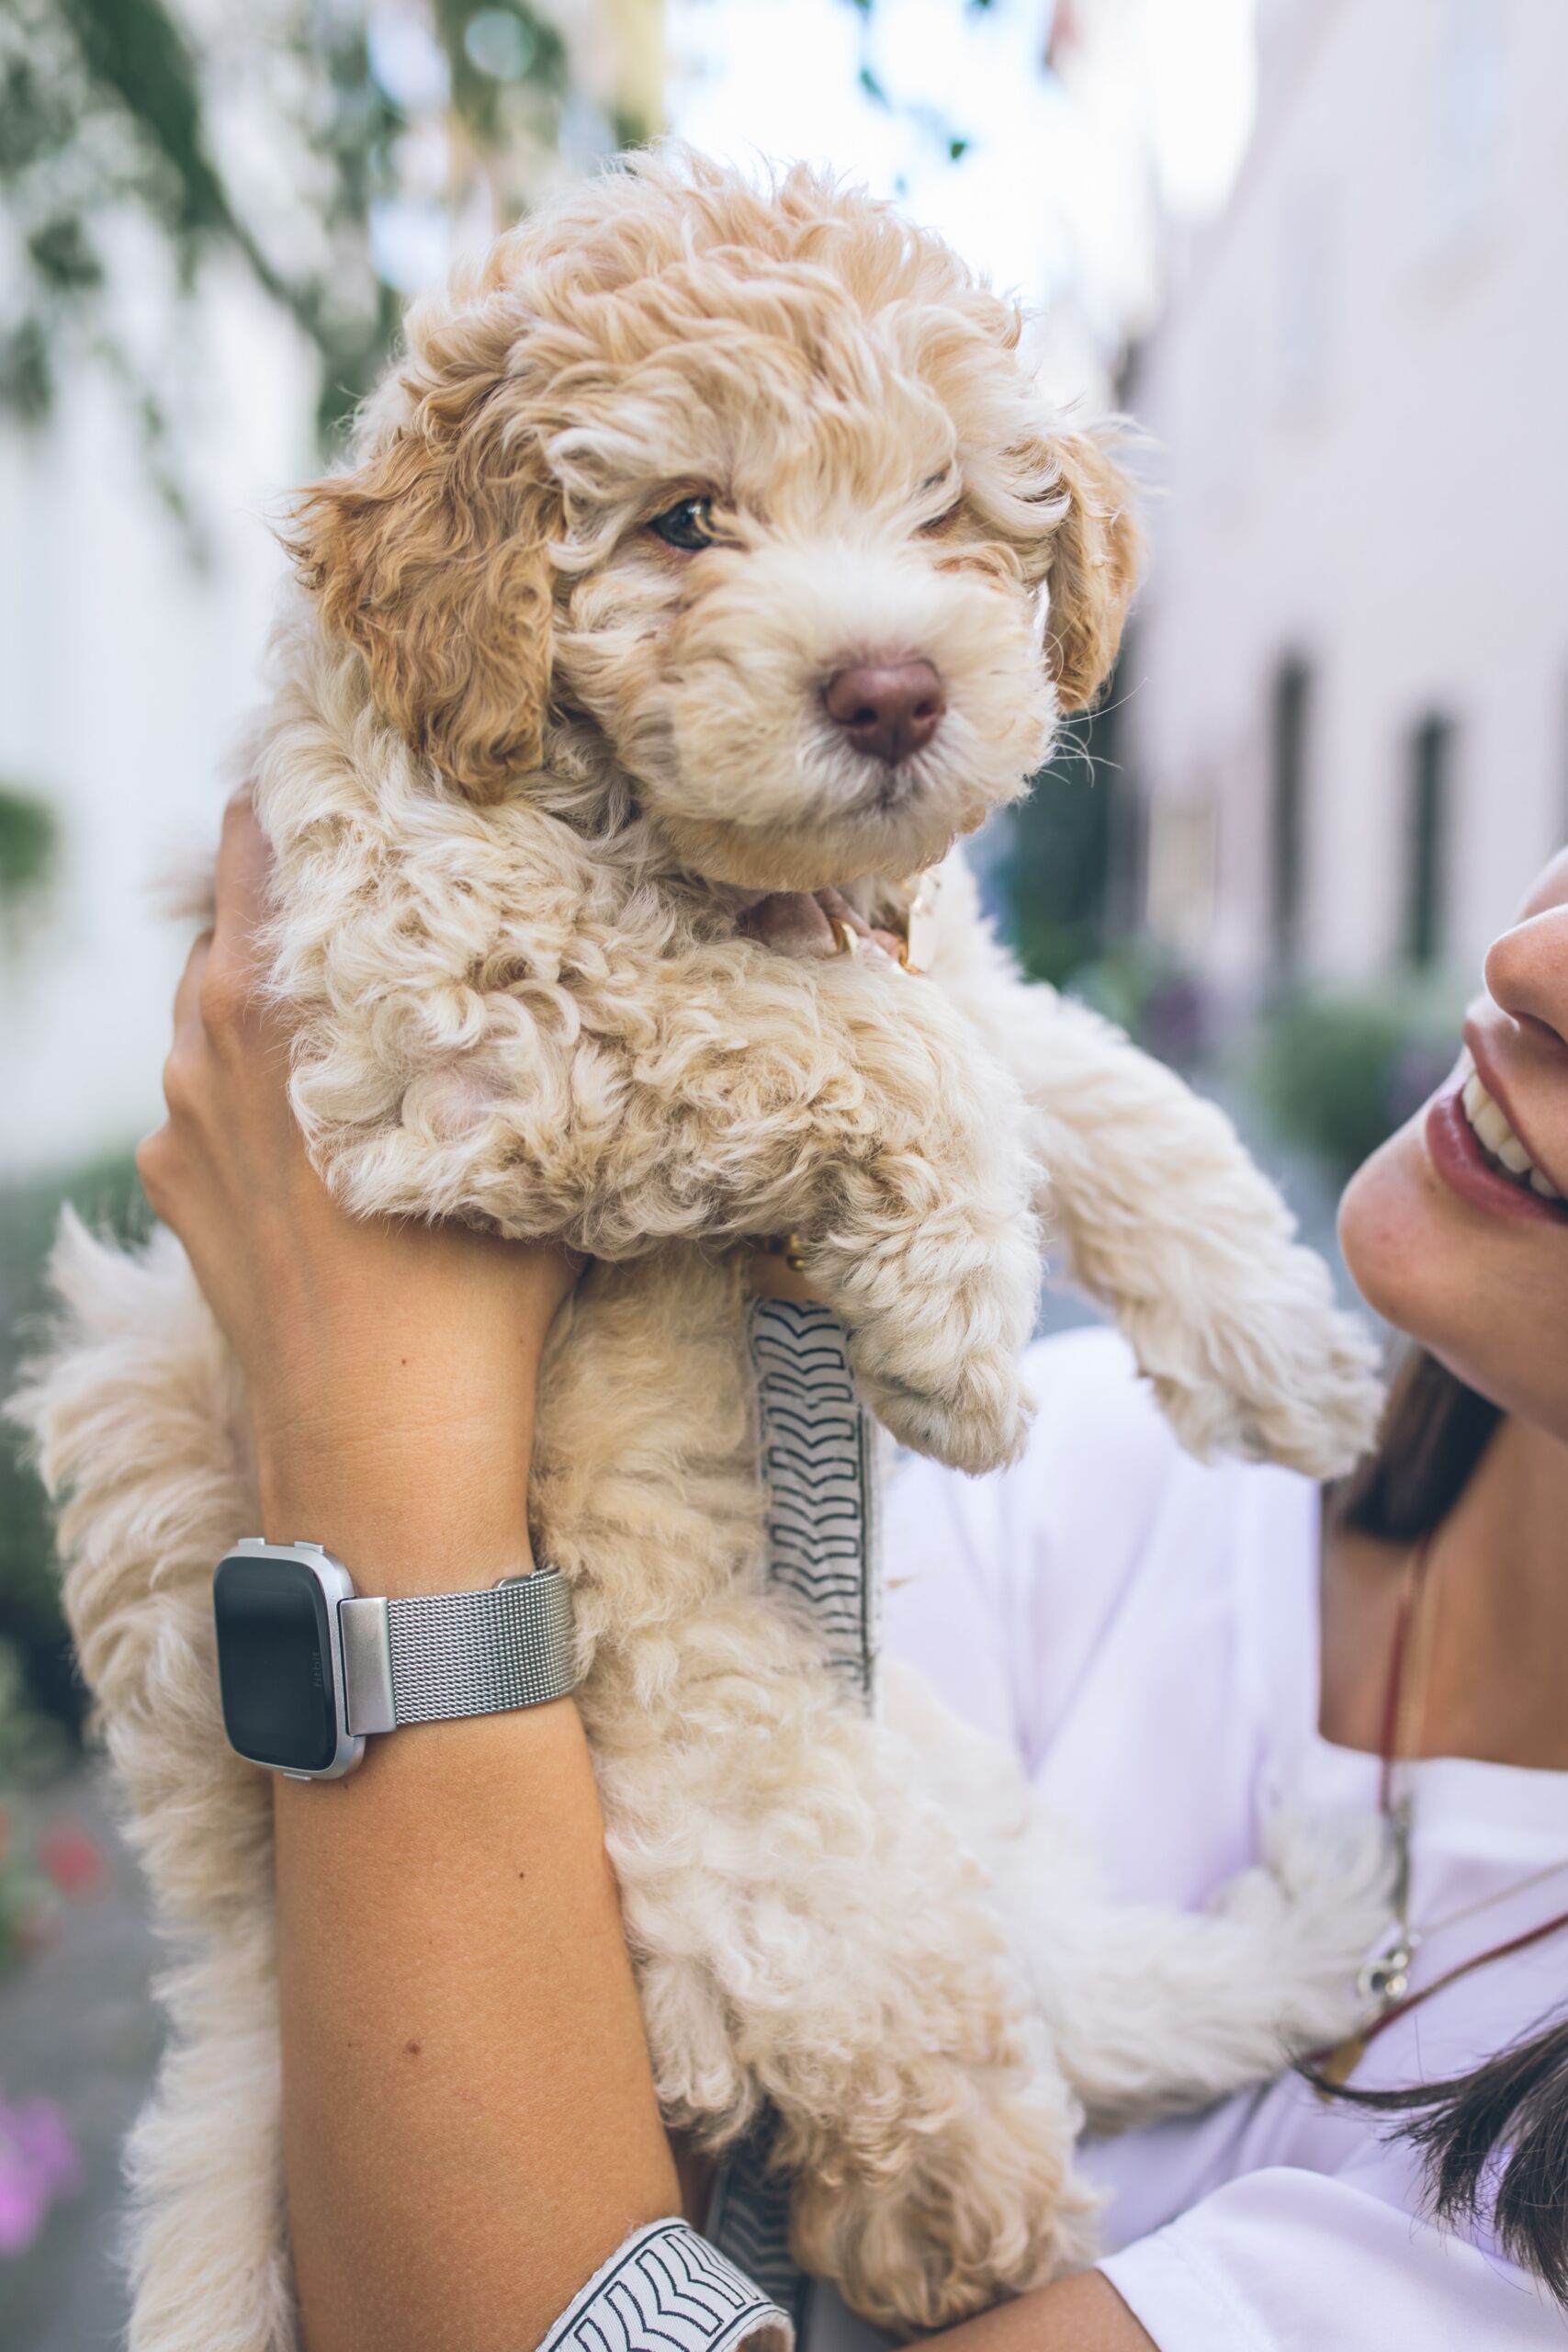 Complete Guide on Goldendoodle Size: Toy, Mini, Medium, or Standard